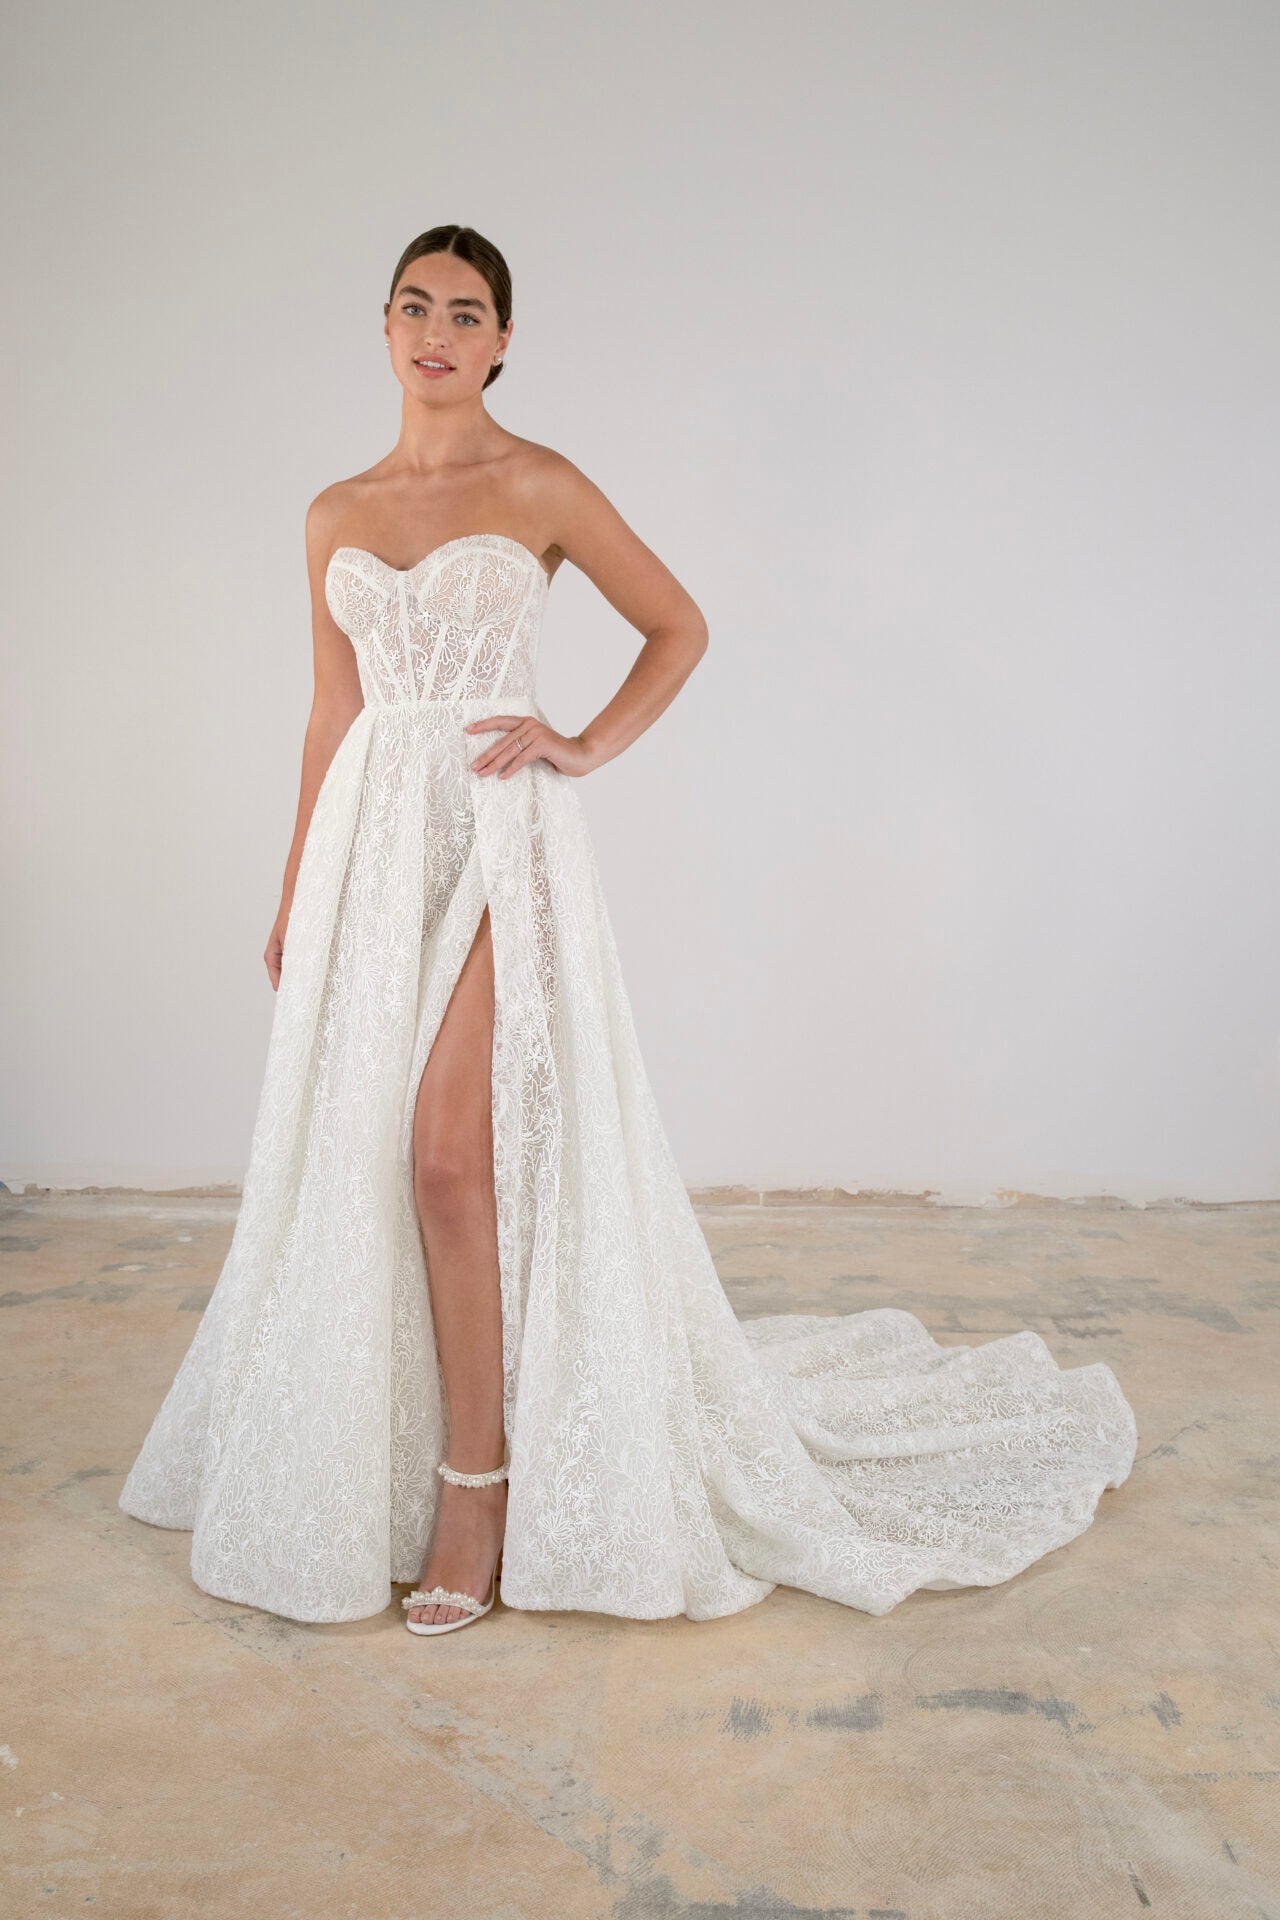 Matte Lace A-Line Gown With Slit by Martina Liana Luxe - Image 1